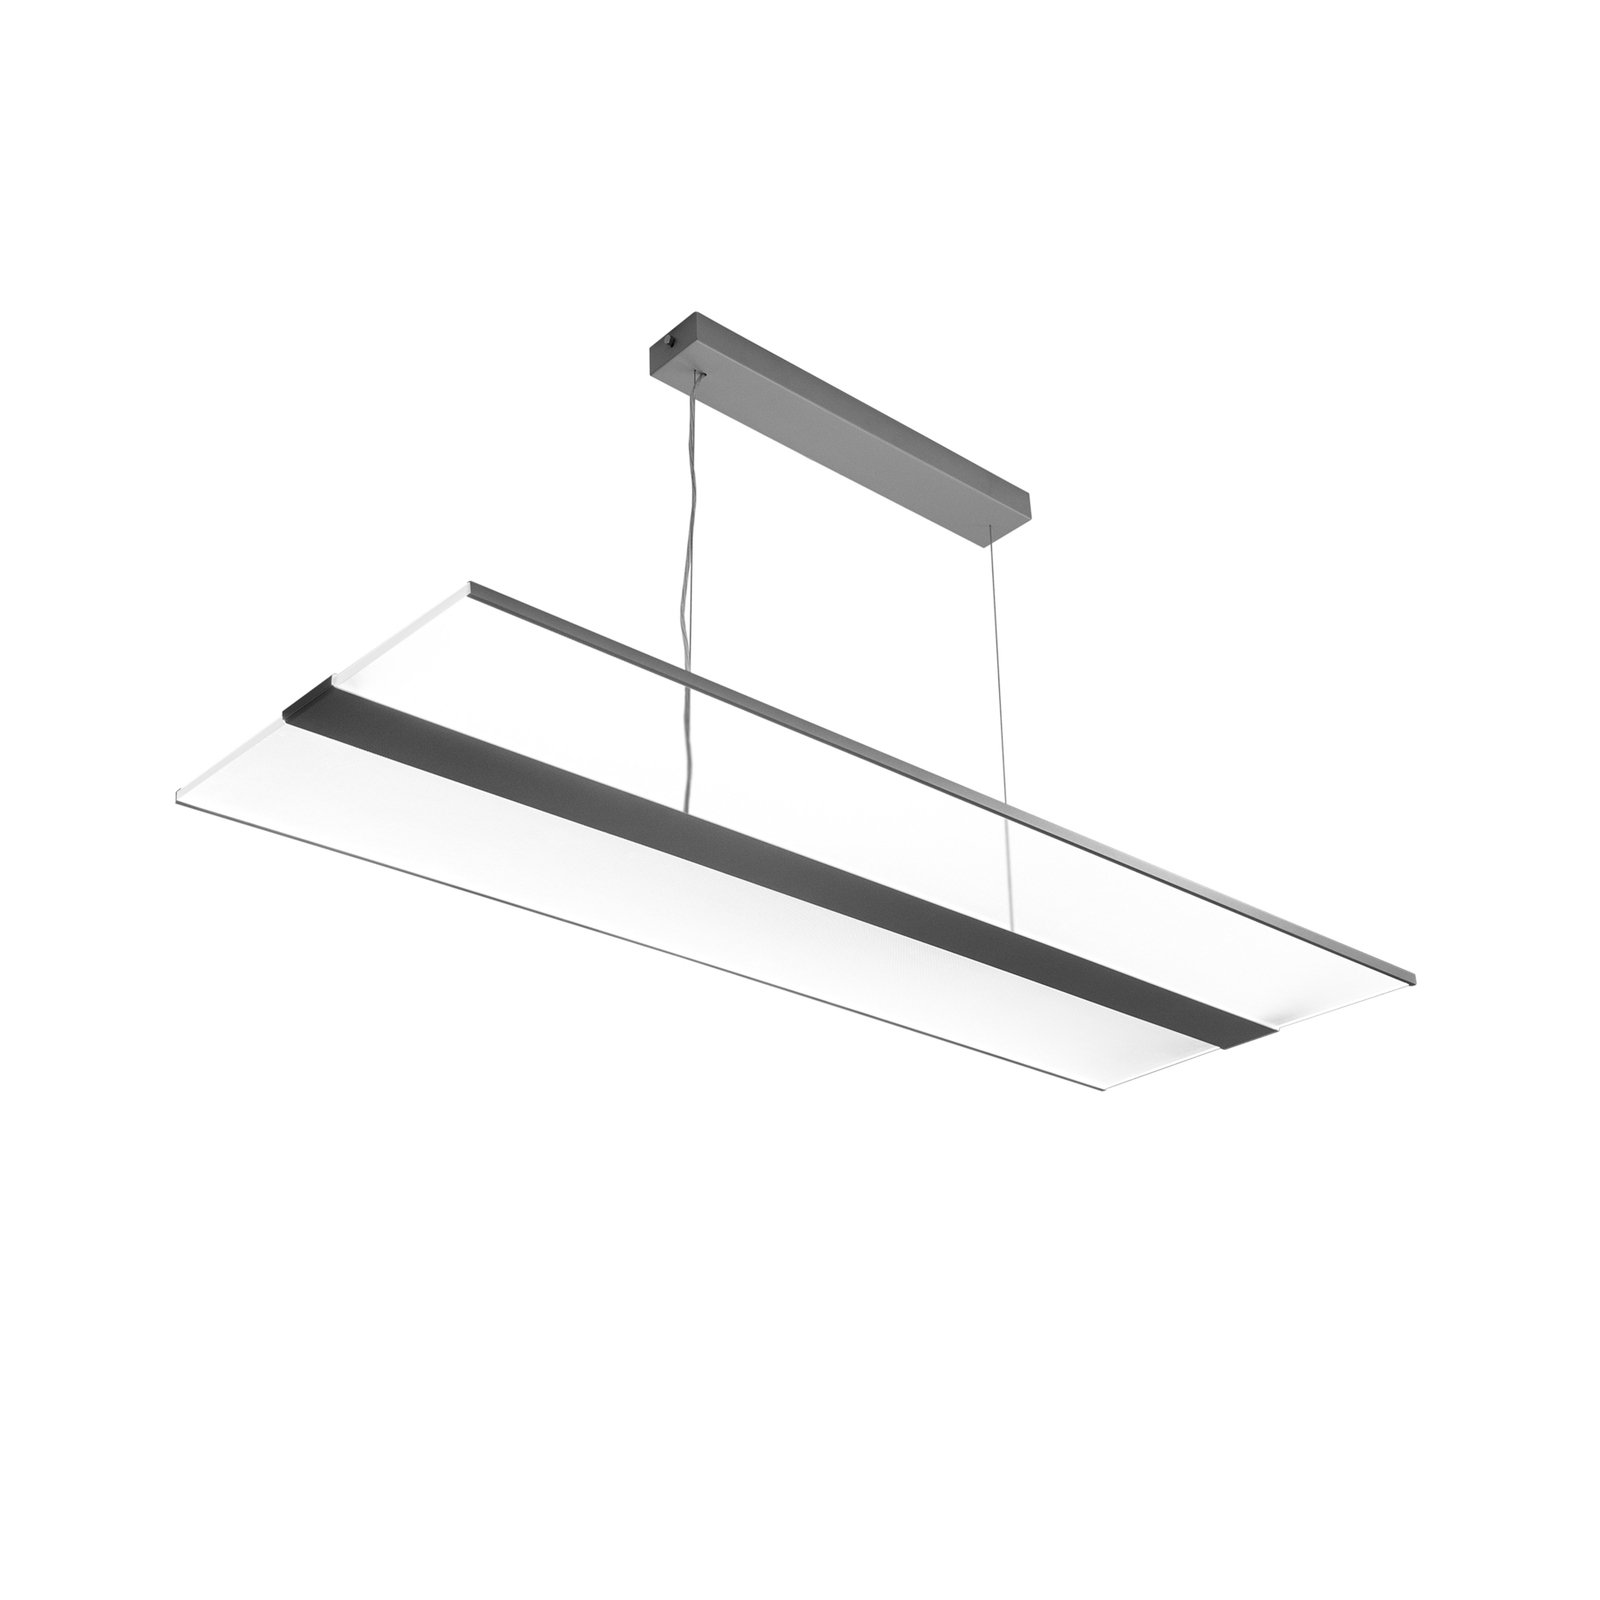 LED hanglamp FLY6000 up/down aan/uit 63W 840